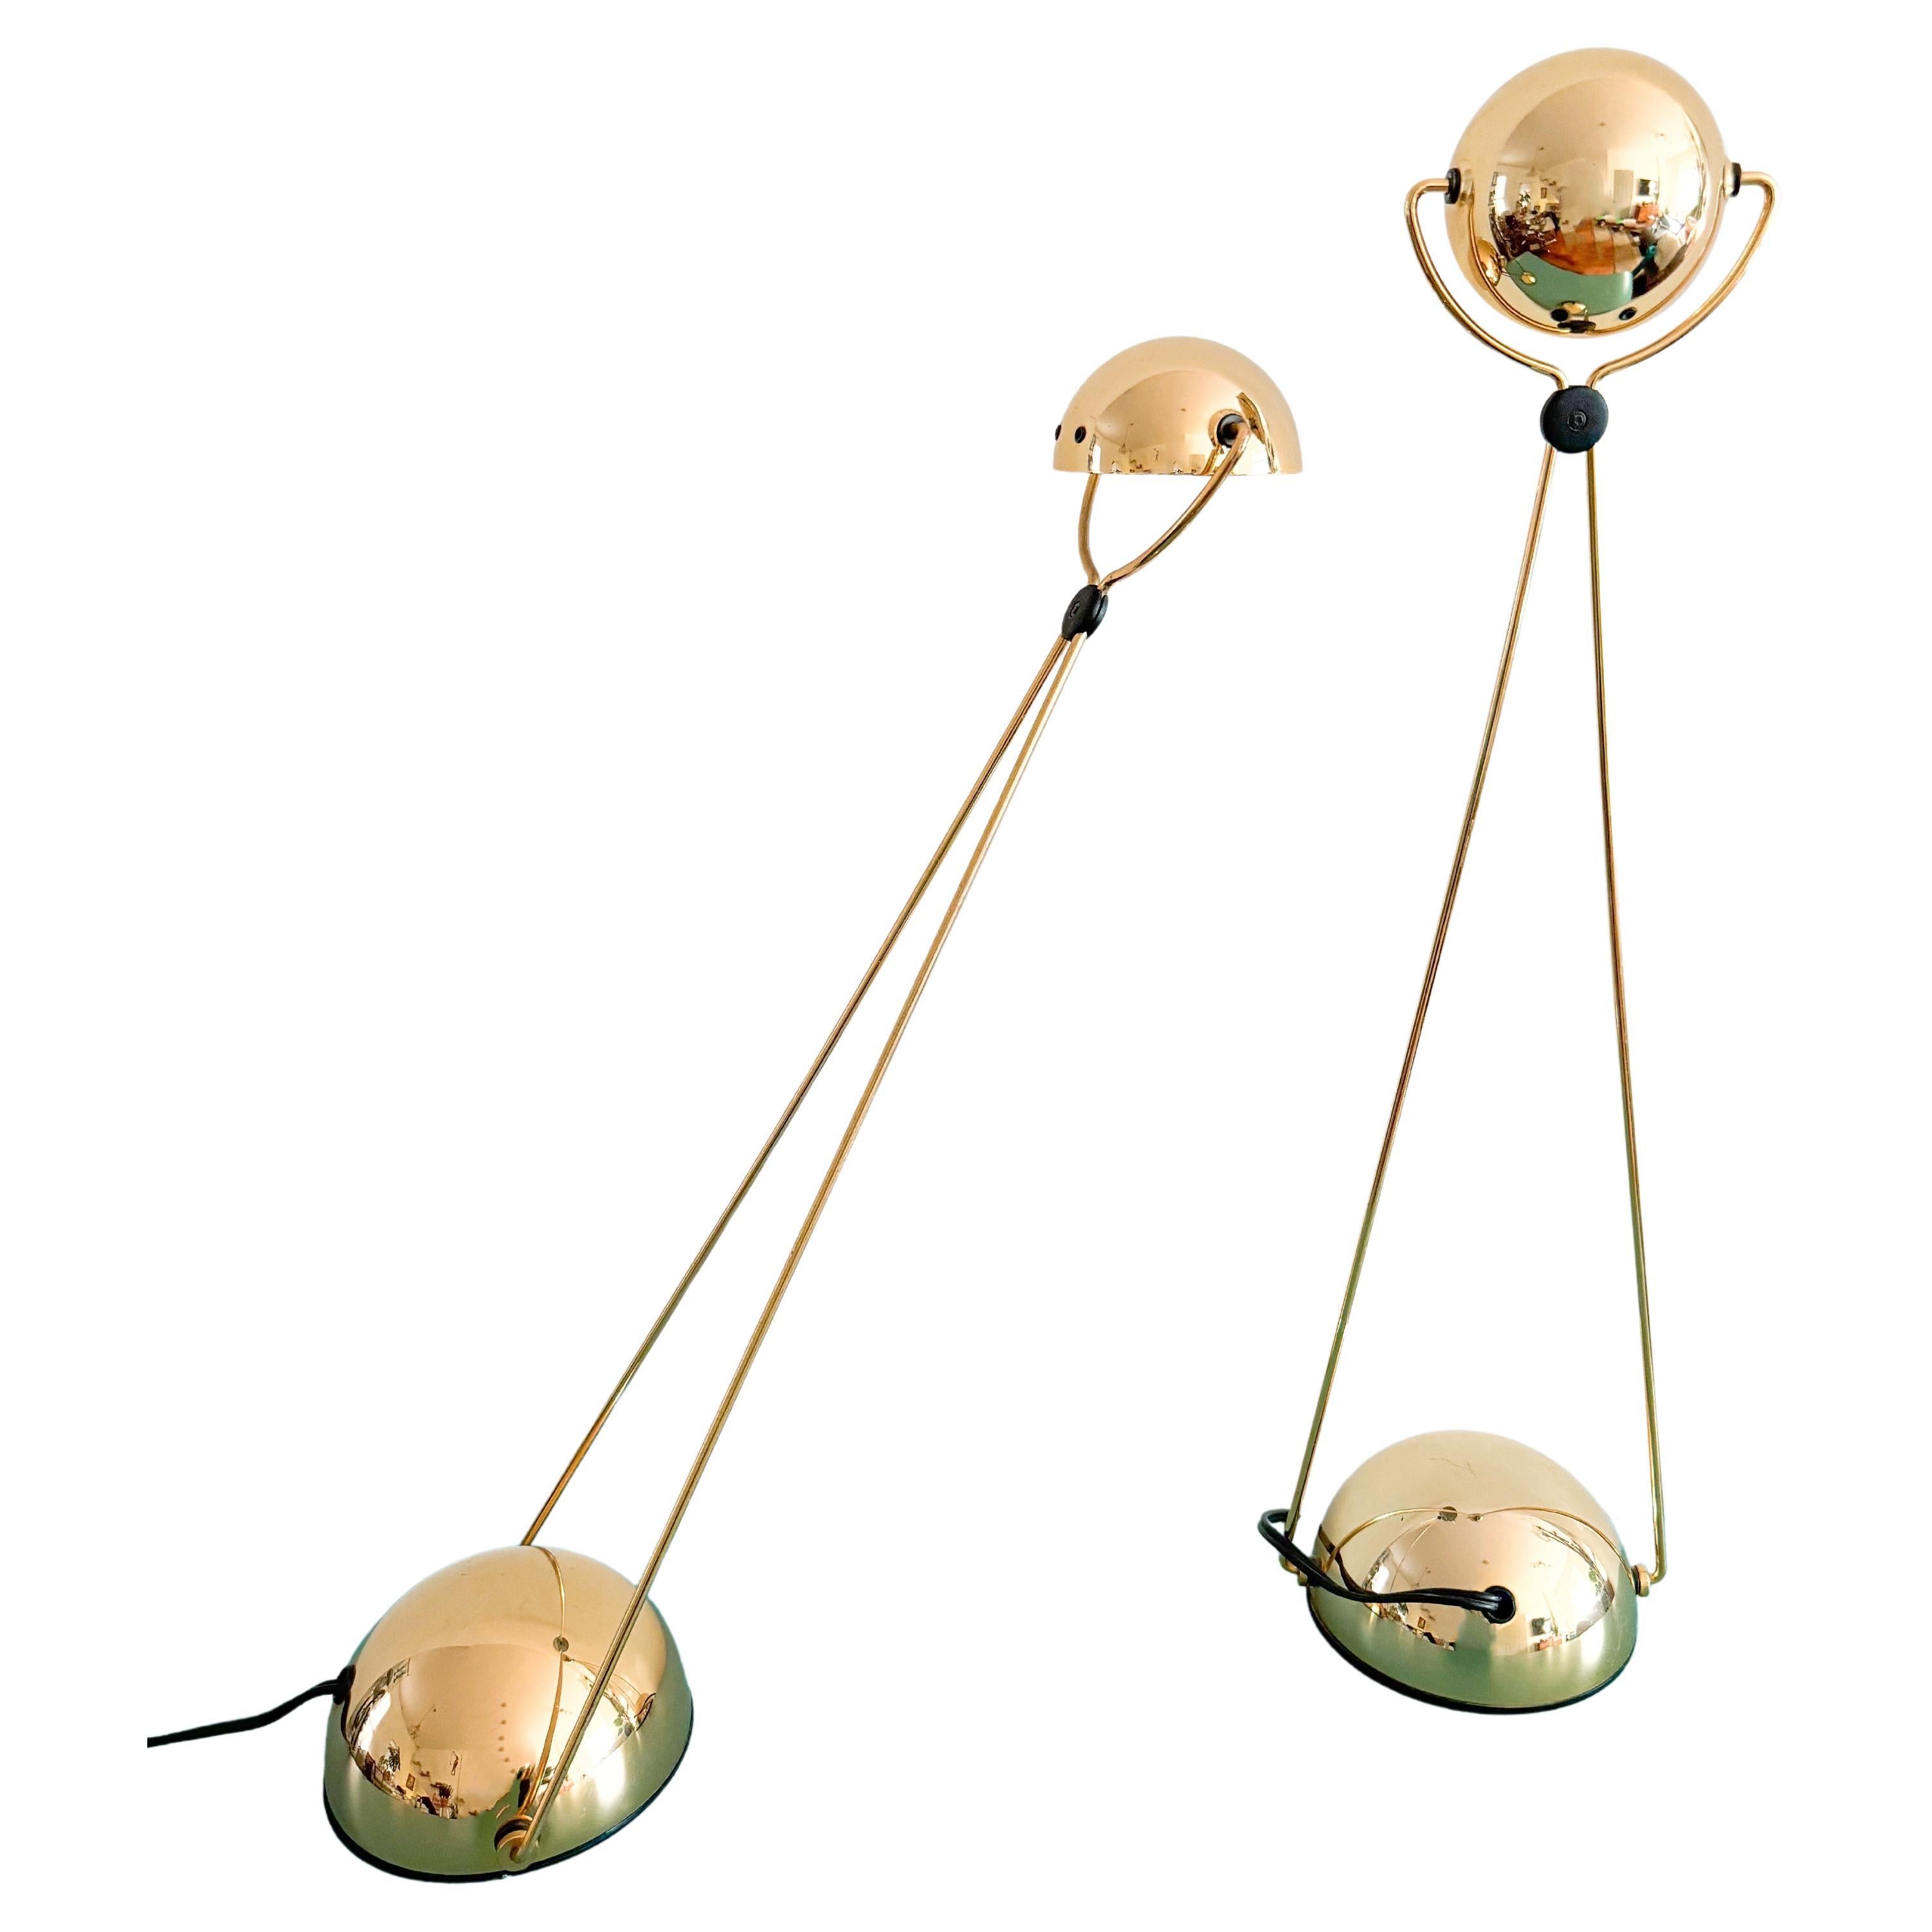 Gold-Plated Metal Italian Table Lamp 'Meridiana' for Stefano Cevoli, 1980s For Sale